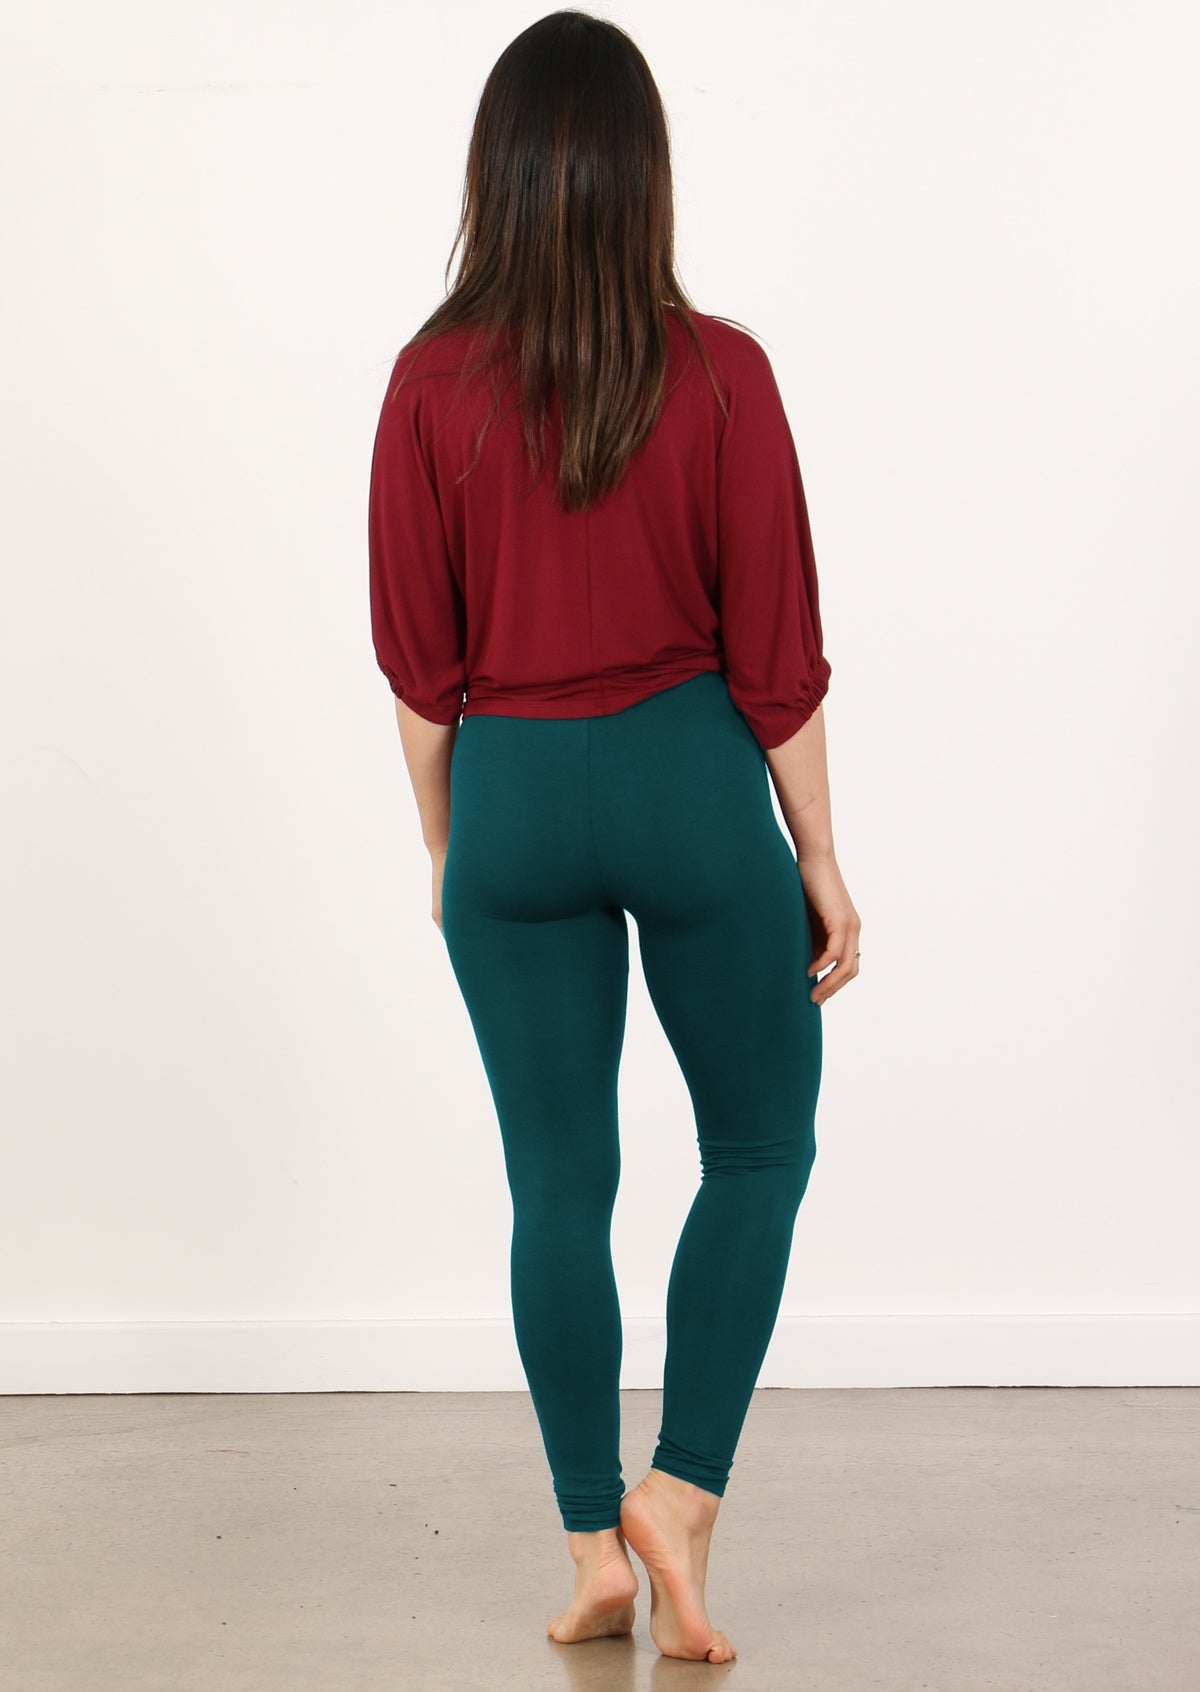 15 Teal leggings outfits ideas | outfits, teal leggings outfit, teal  leggings